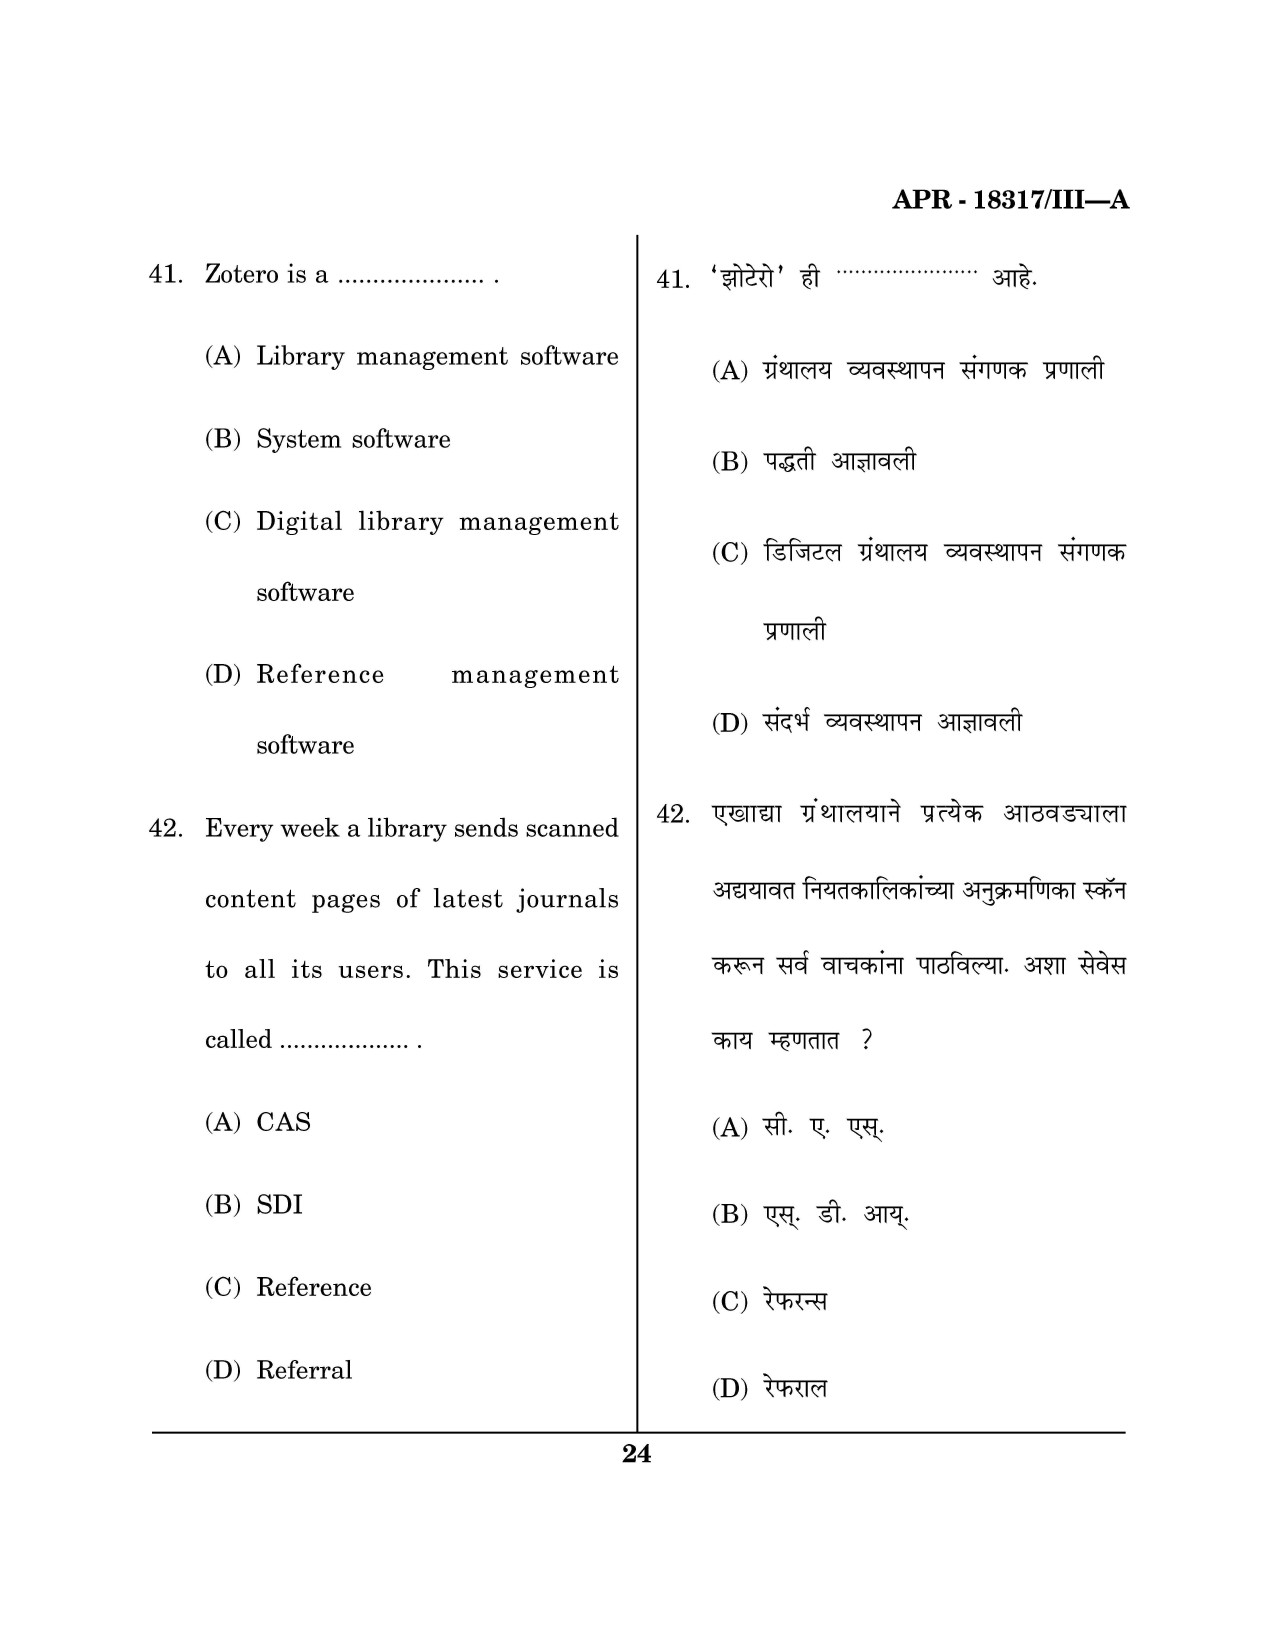 Maharashtra SET Library Information Science Question Paper III April 2017 23